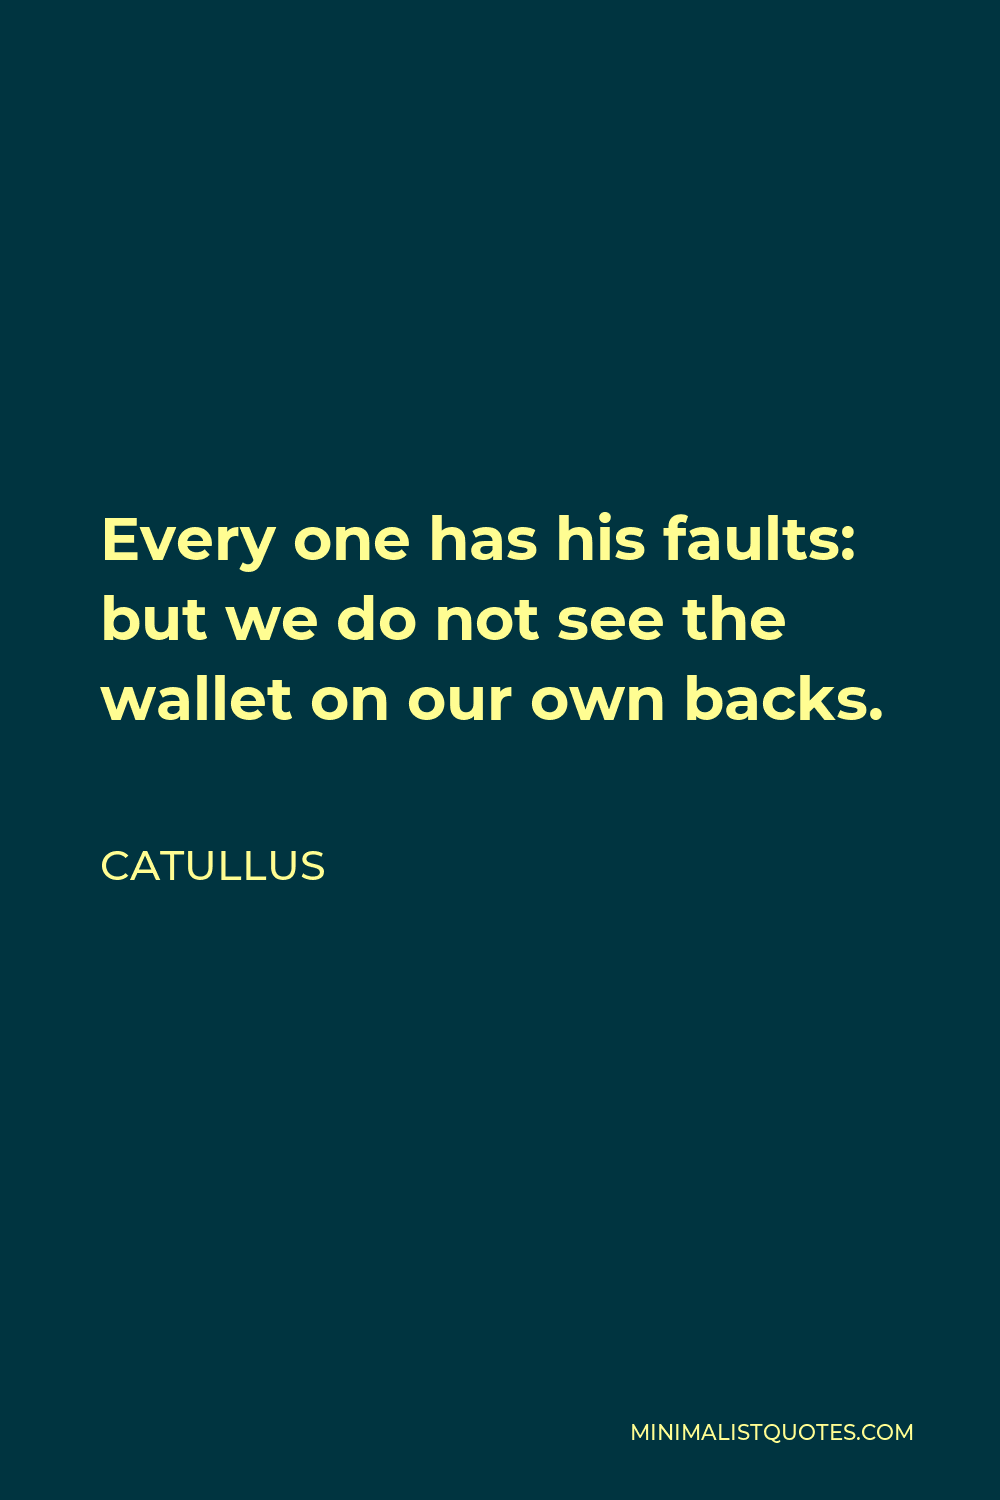 Catullus Quote - Every one has his faults: but we do not see the wallet on our own backs.